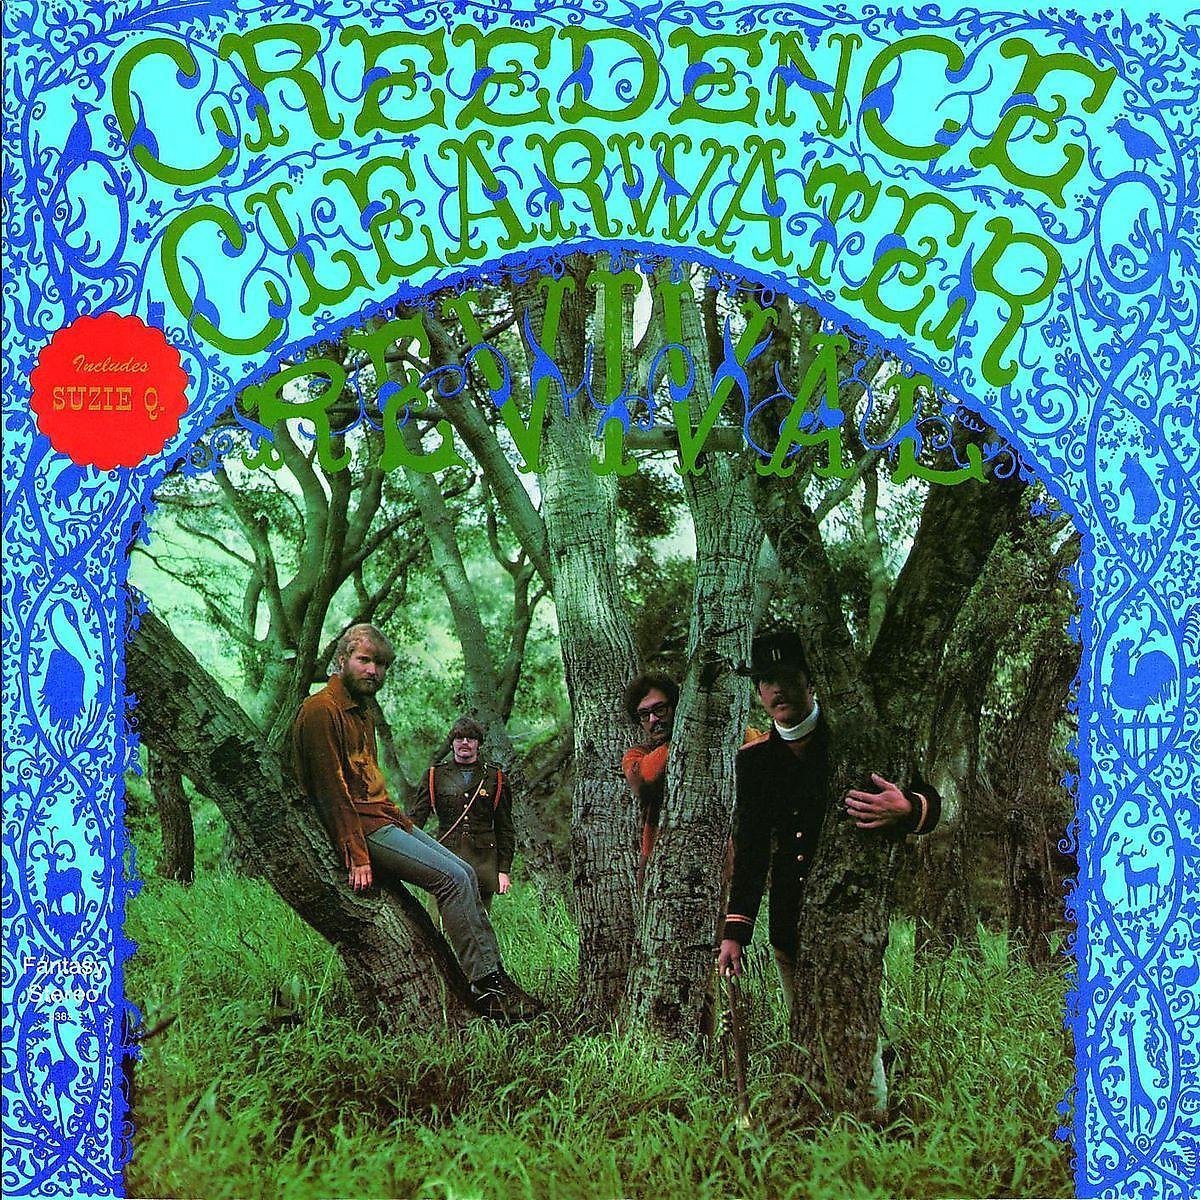 Creedence Clearwater Revival – Vinyl | Creedence Clearwater Revival carturesti.ro poza noua